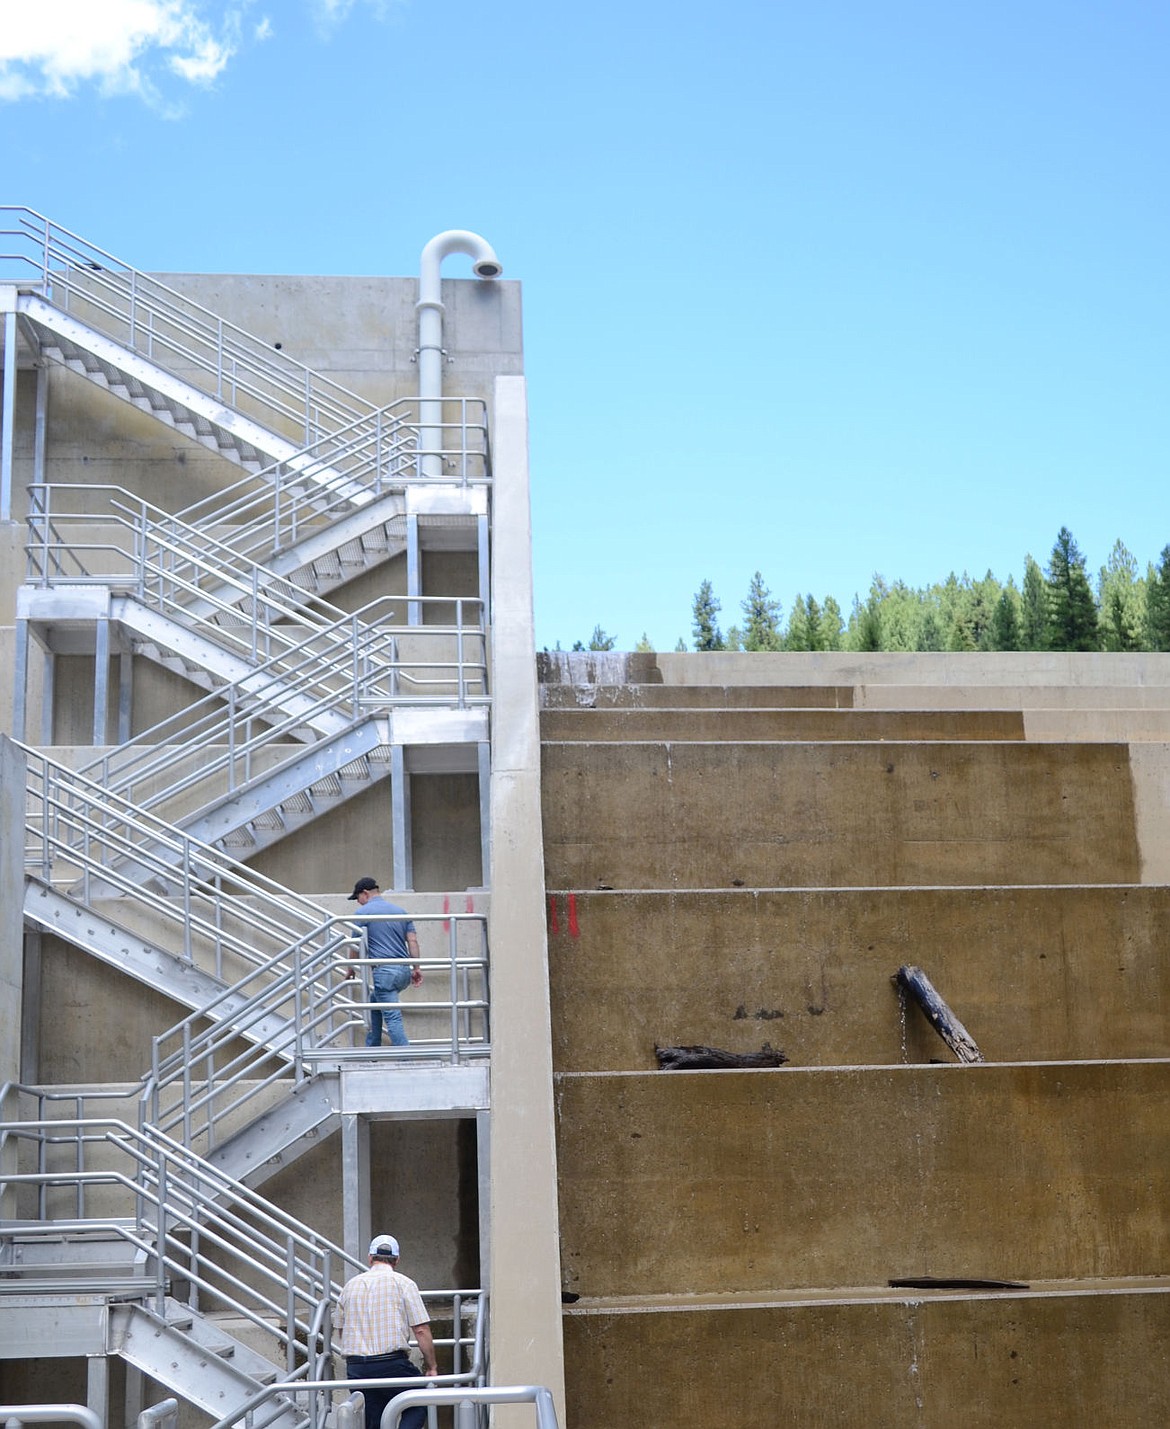 &lt;p&gt;Ryan Jones, above, and CR Leisinger, of Morrison-Maierle, climb the stairway on the Flower Creek Dam during Wednesday's tour. (Seaborn Larson/The Western News)&lt;/p&gt;